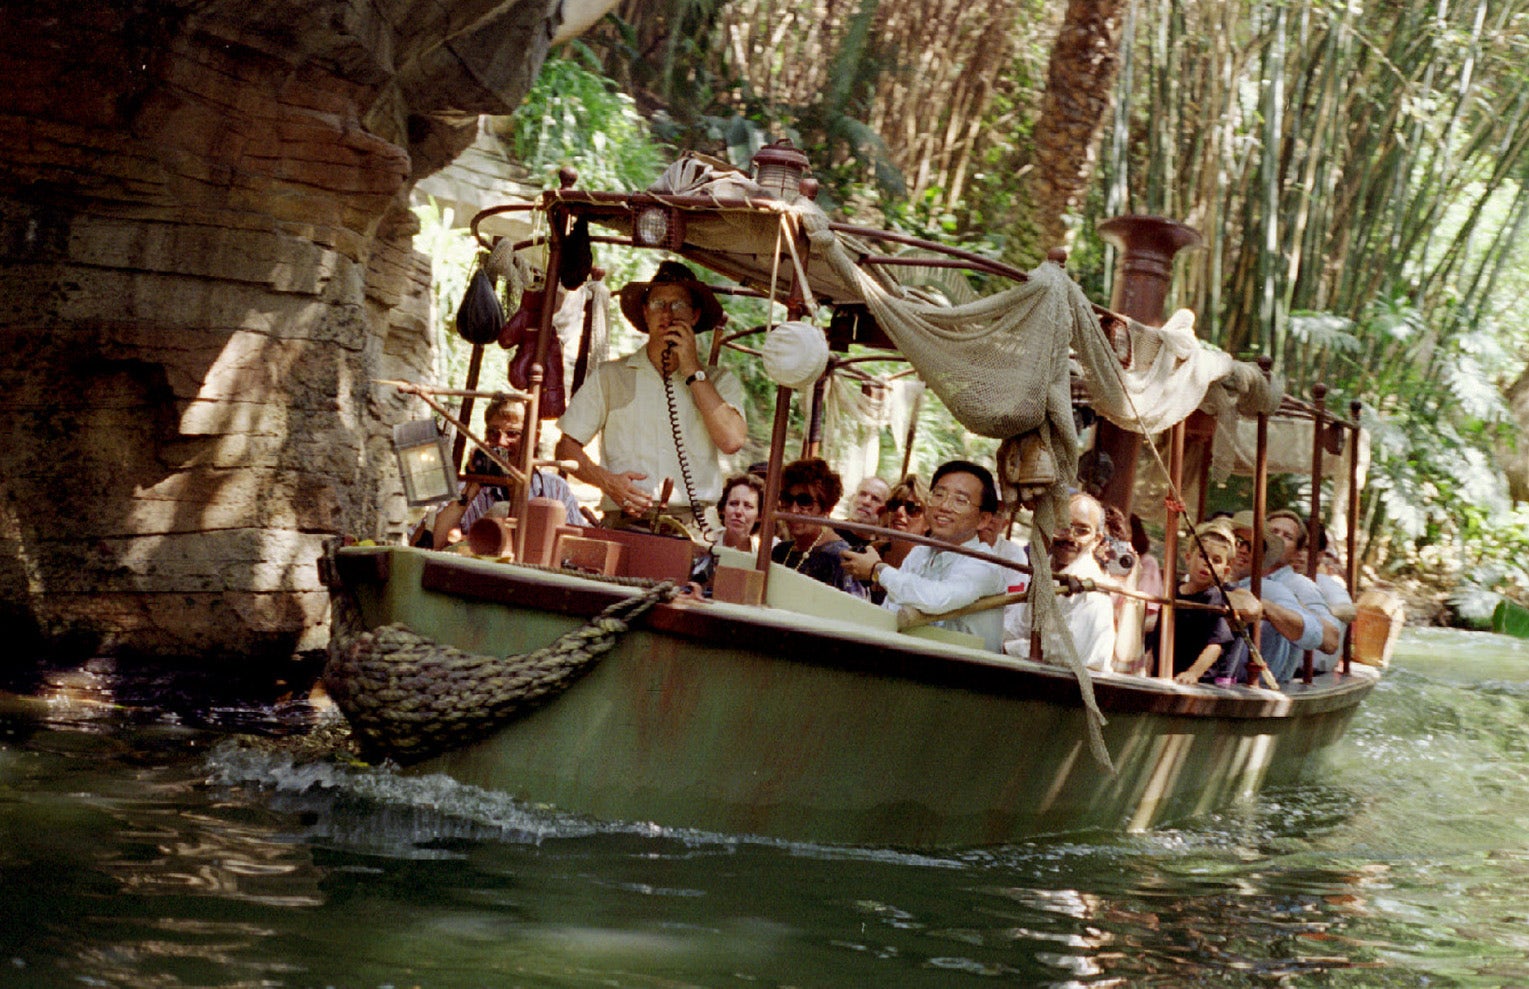 Disney to redesign Jungle Cruise ride at theme parks, remove 'negative depictions' of indigenous peoples - Fox News